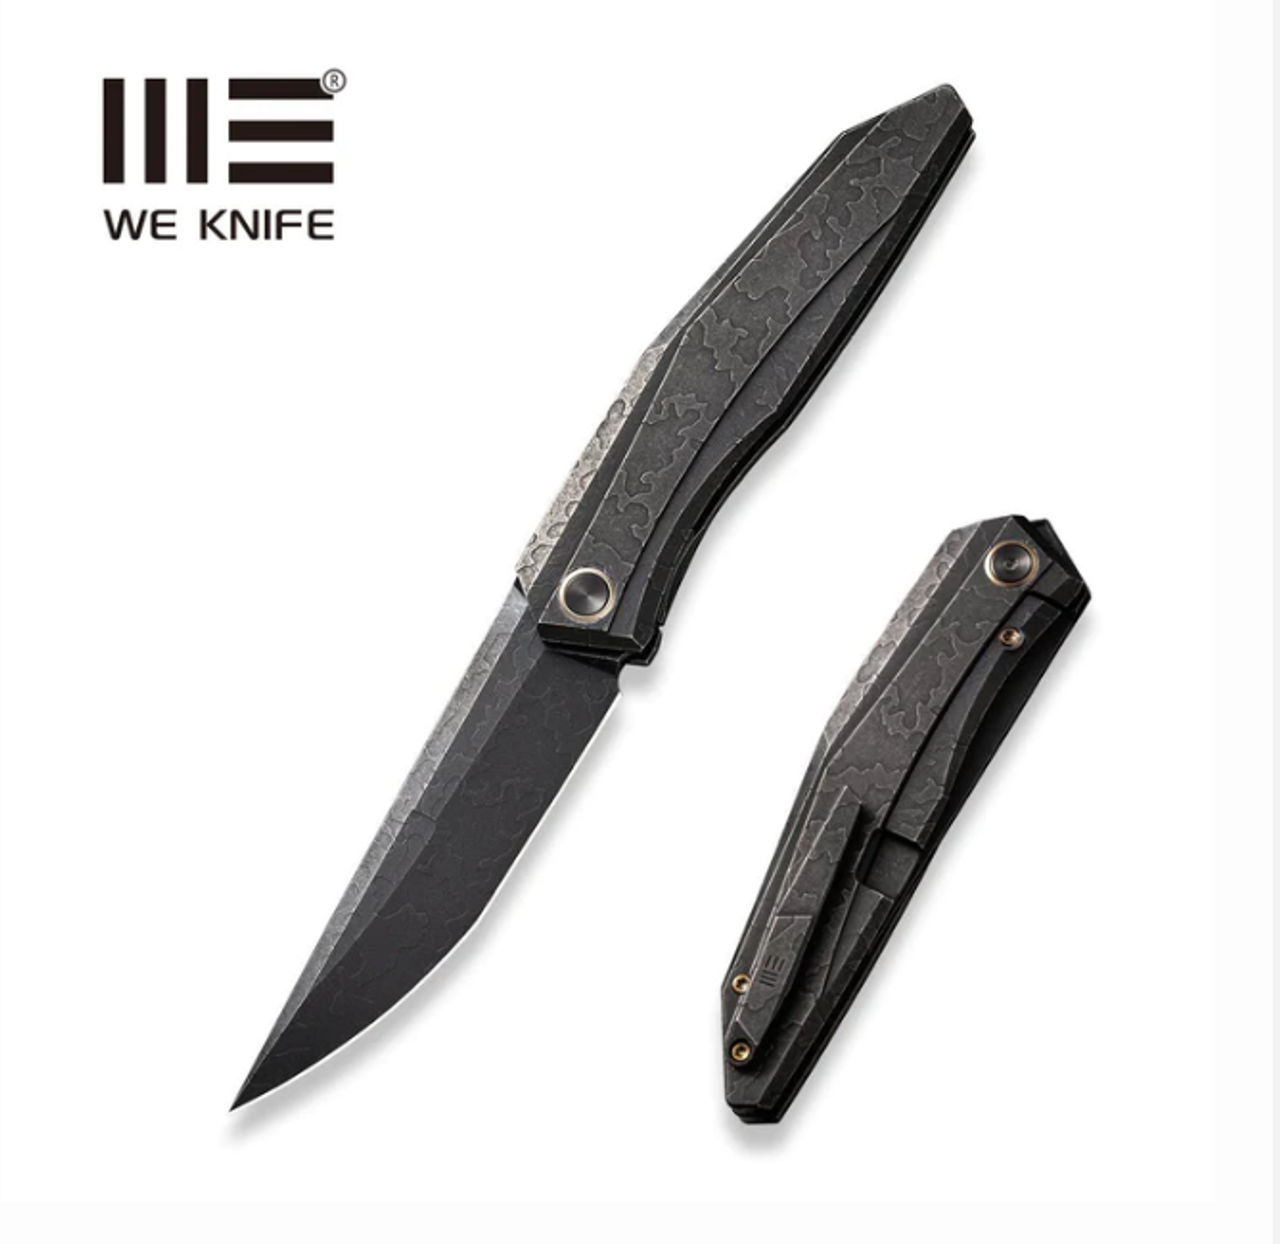 We Knife Co. WEKNIFE Cybernetic Top Flipper Knife Black Stonewashed With Etching Pattern Titanium Handle (3.91" Black Stonewashed With Etching Pattern CPM 20CV Blade) WE22033-4